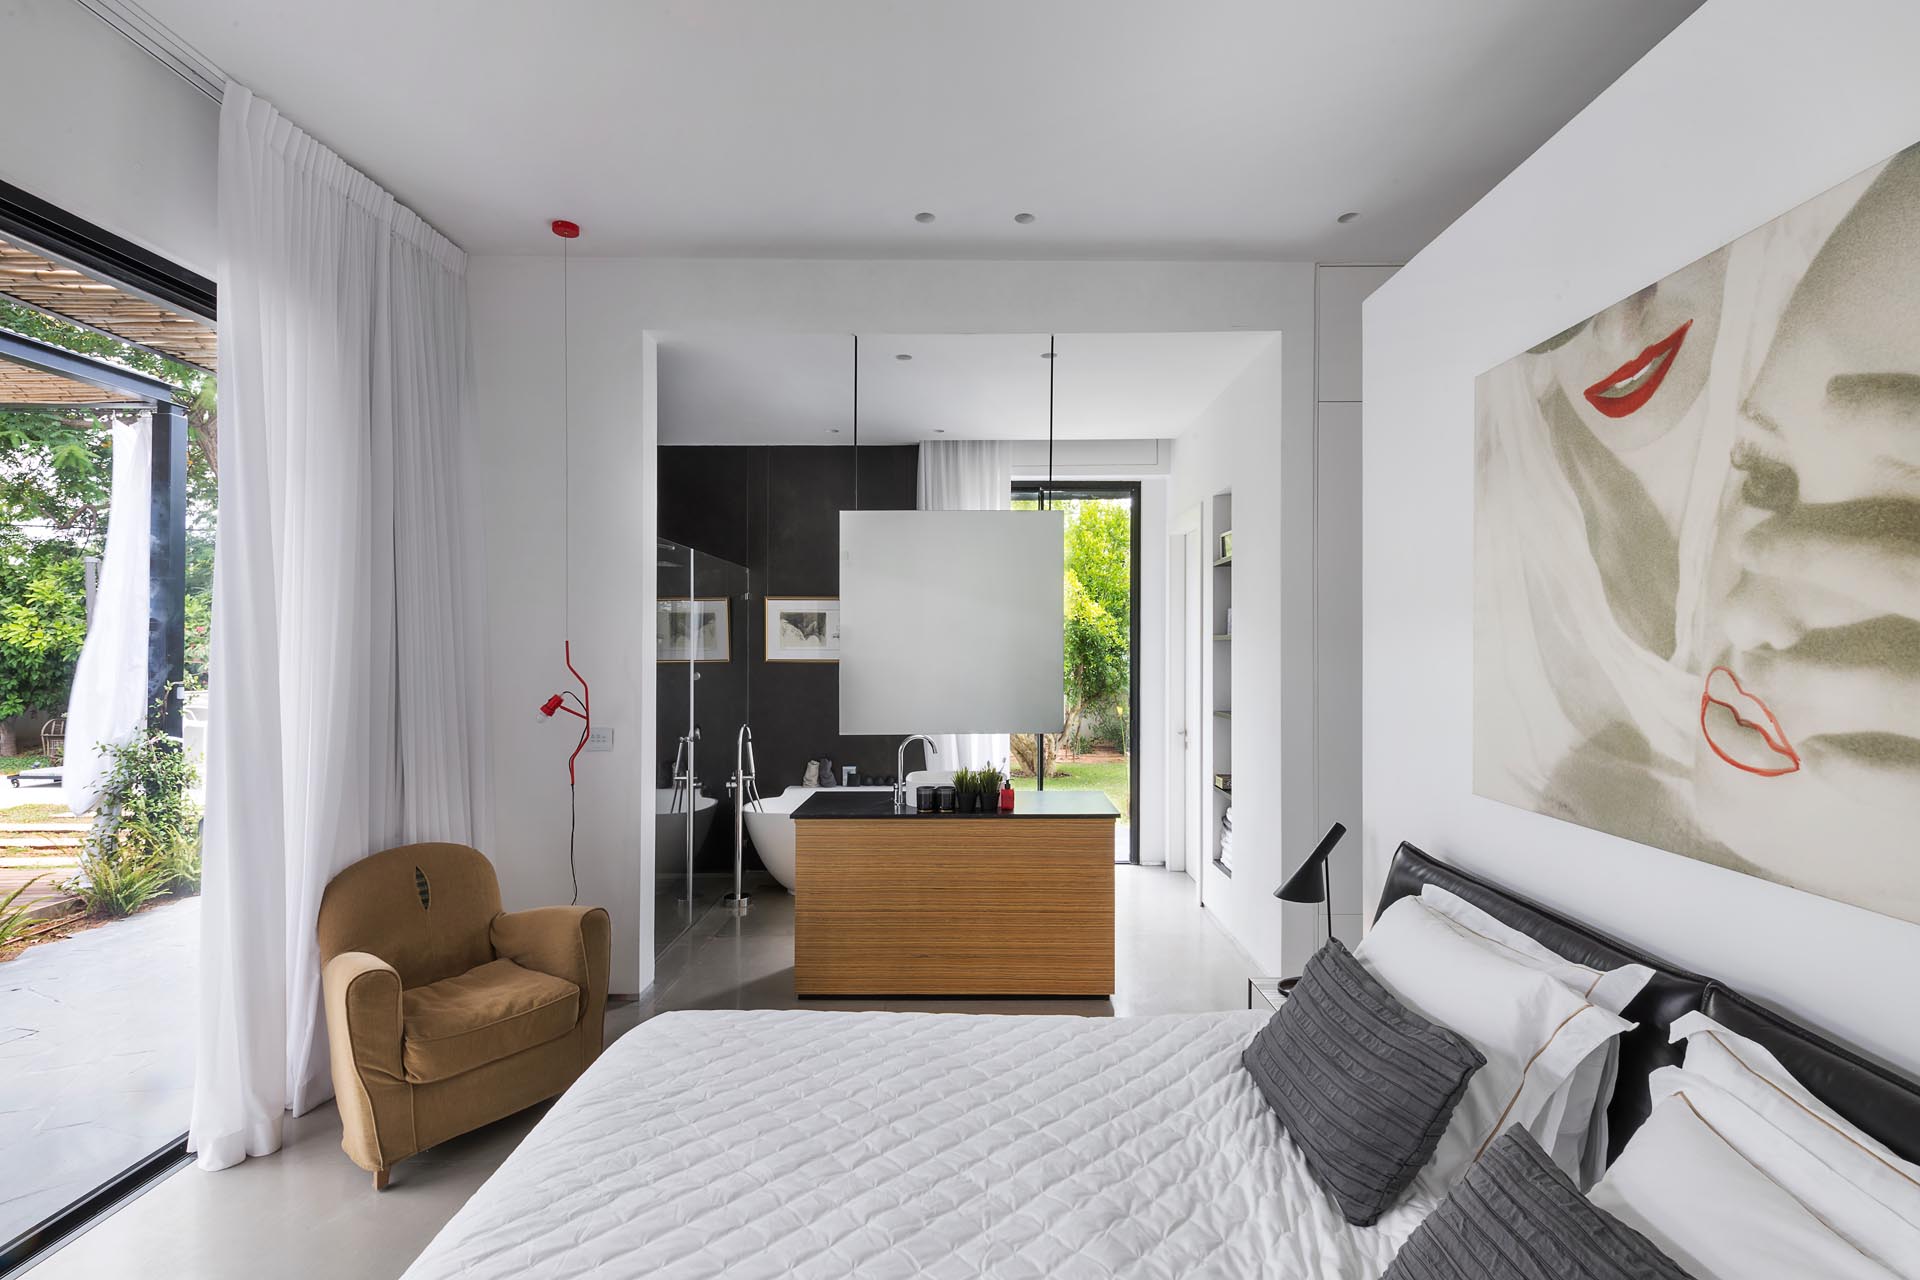 This modern master bedroom also opens to the outdoor spaces and has an en-suite bathroom with a freestanding bathtub, a black accent wall, and a glass-enclosed shower.